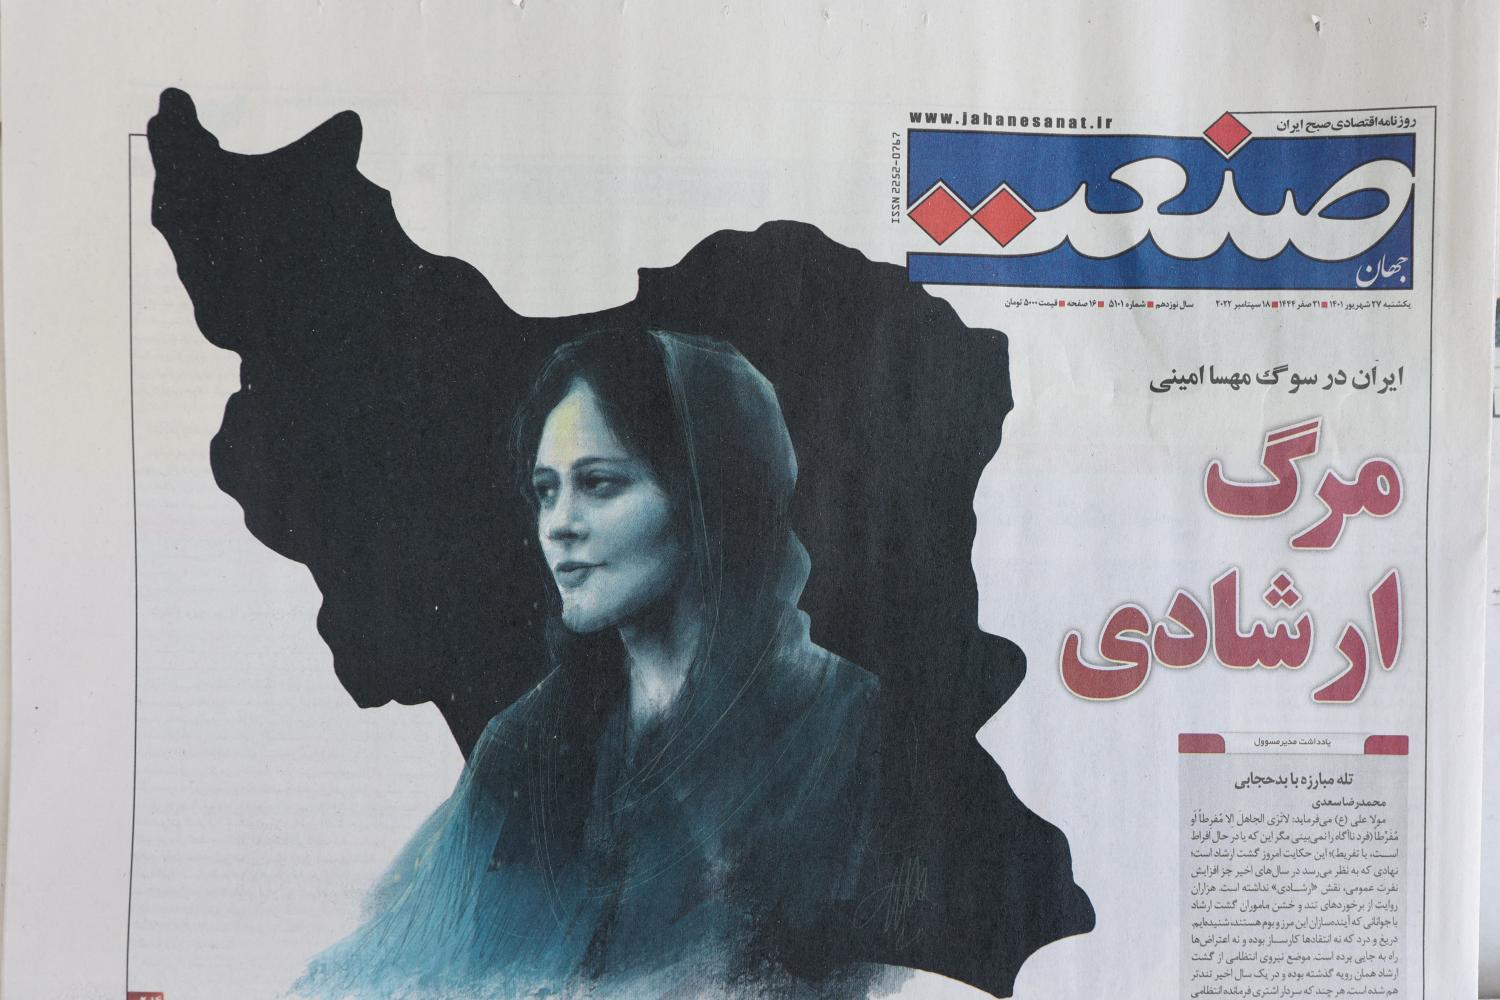 A newspaper with a cover picture of Mahsa Amini, a woman who died after being arrested by the Islamic republic's "morality police" is seen in Tehran, Iran September 18, 2022. Majid Asgaripour/WANA (West Asia News Agency) via REUTERS ATTENTION EDITORS - THIS IMAGE HAS BEEN SUPPLIED BY A THIRD PARTY.